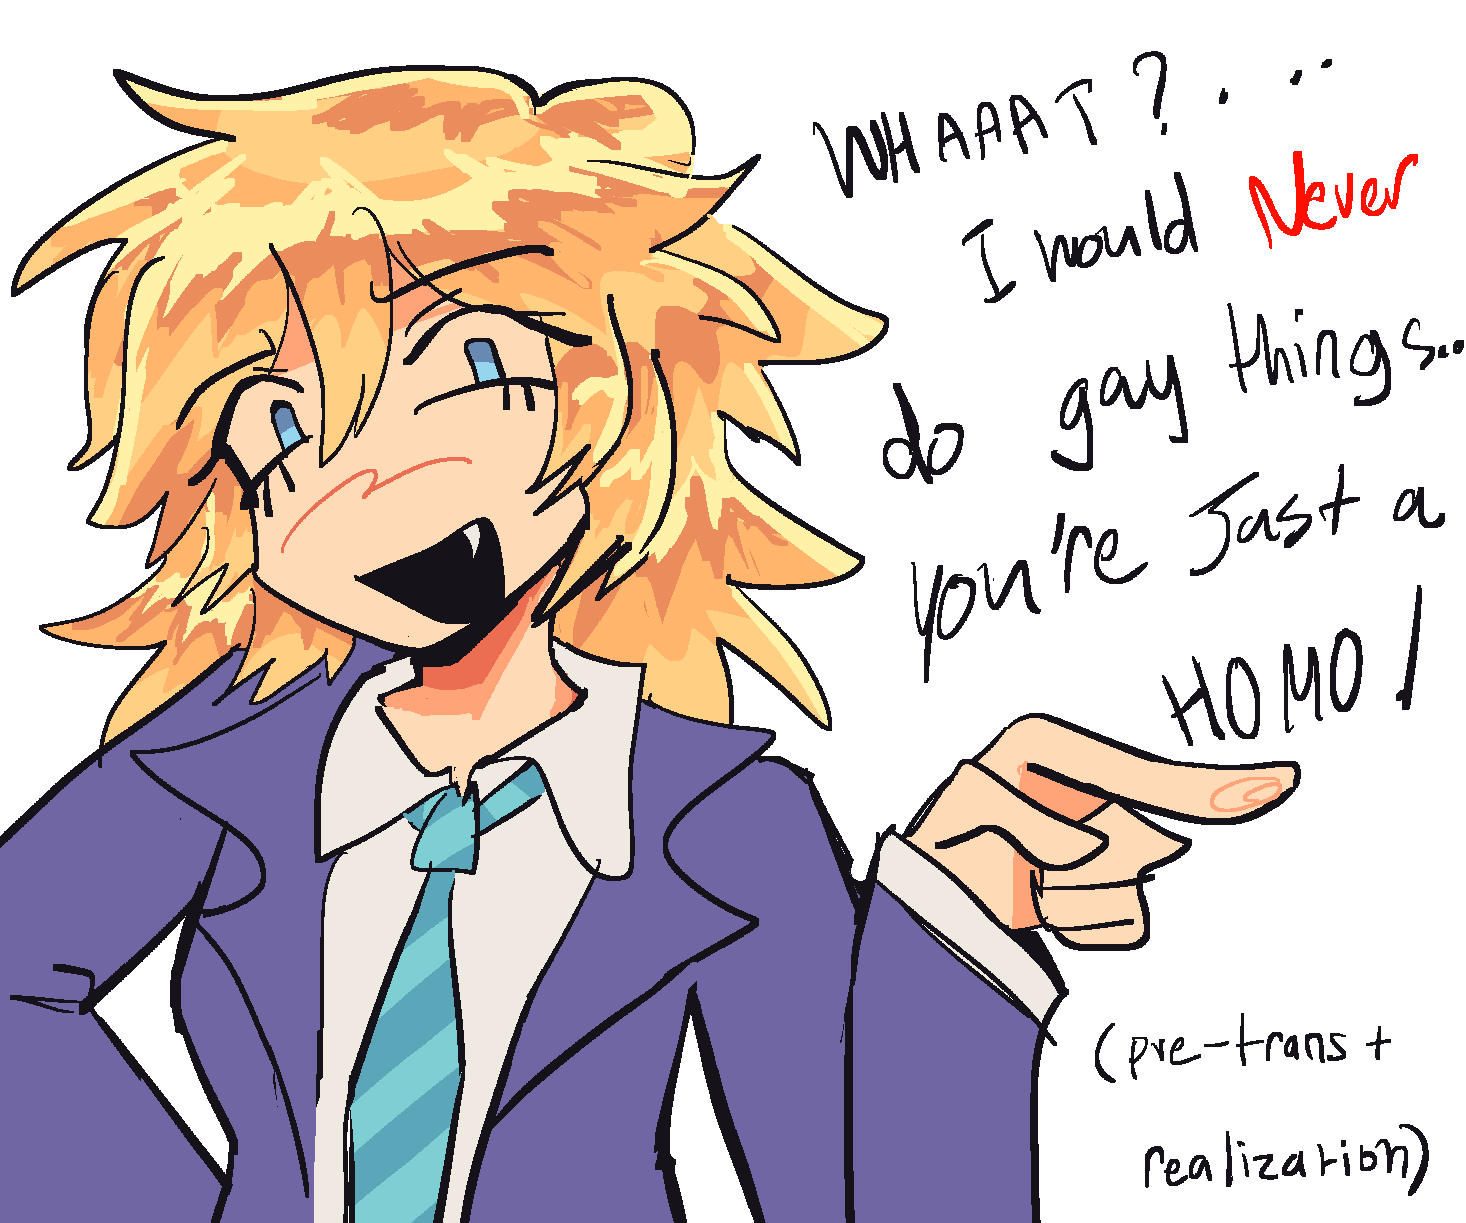 ID: a drawing of fem teru, pointing a finger to the left with the text WHAAAT? i would Never do gay things... youre just a HOMO! with the word never highlighted in red. and a smaller text below saying pre-trans plus realization in round brackets /end id